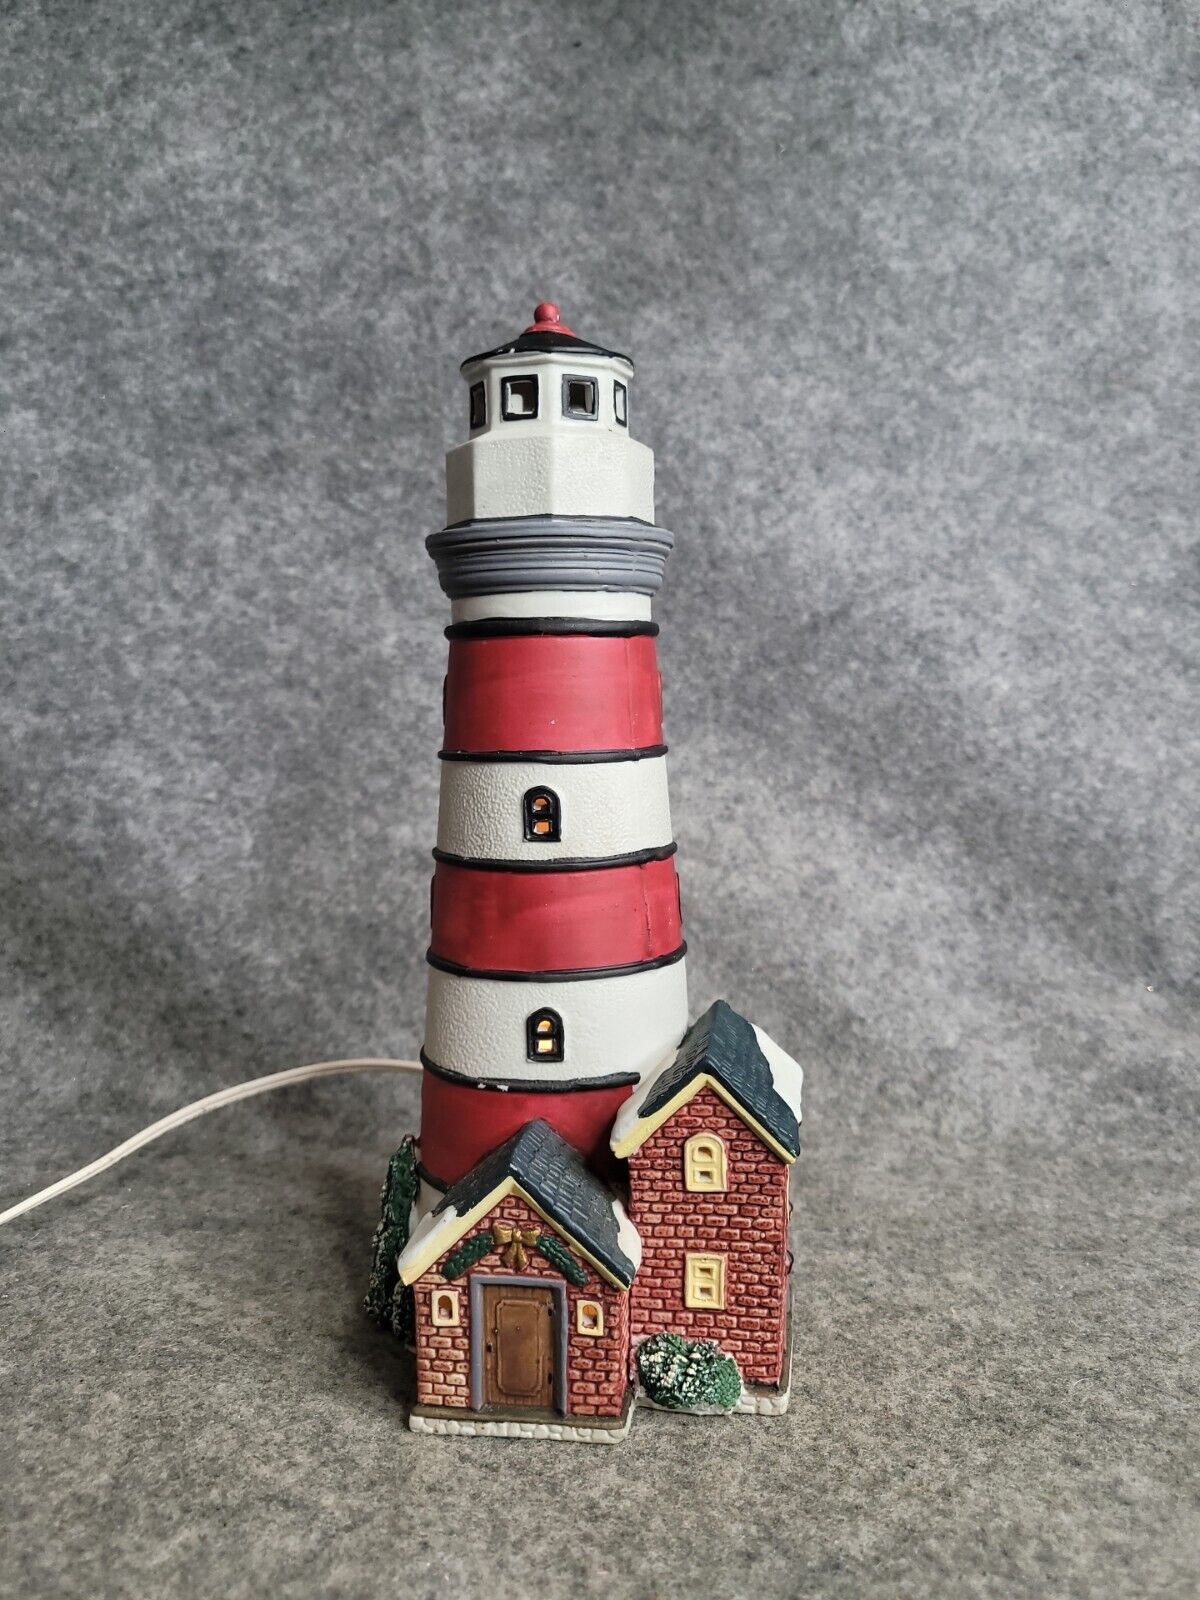 Vintage Lemax Plymouth Corners Lighted Ceramic Light House Village Home Decor